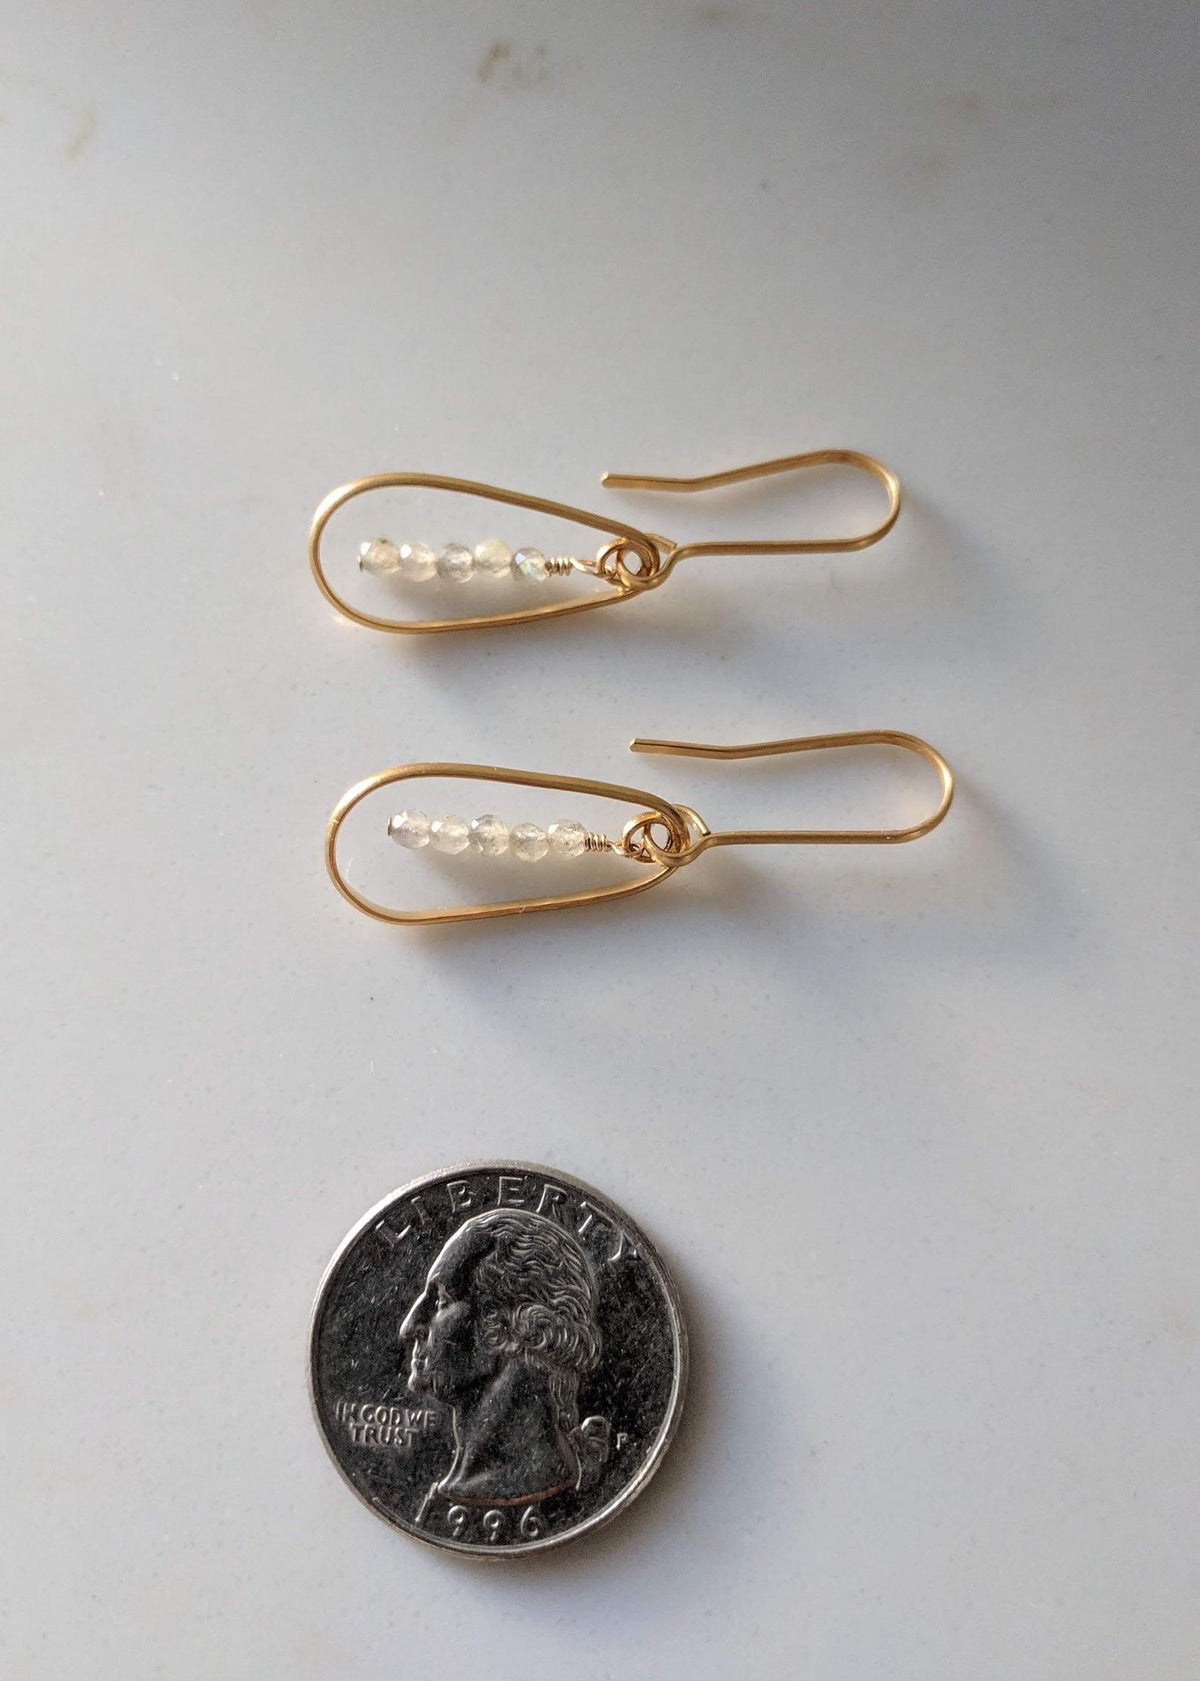 Earrings with a Quarter for scale